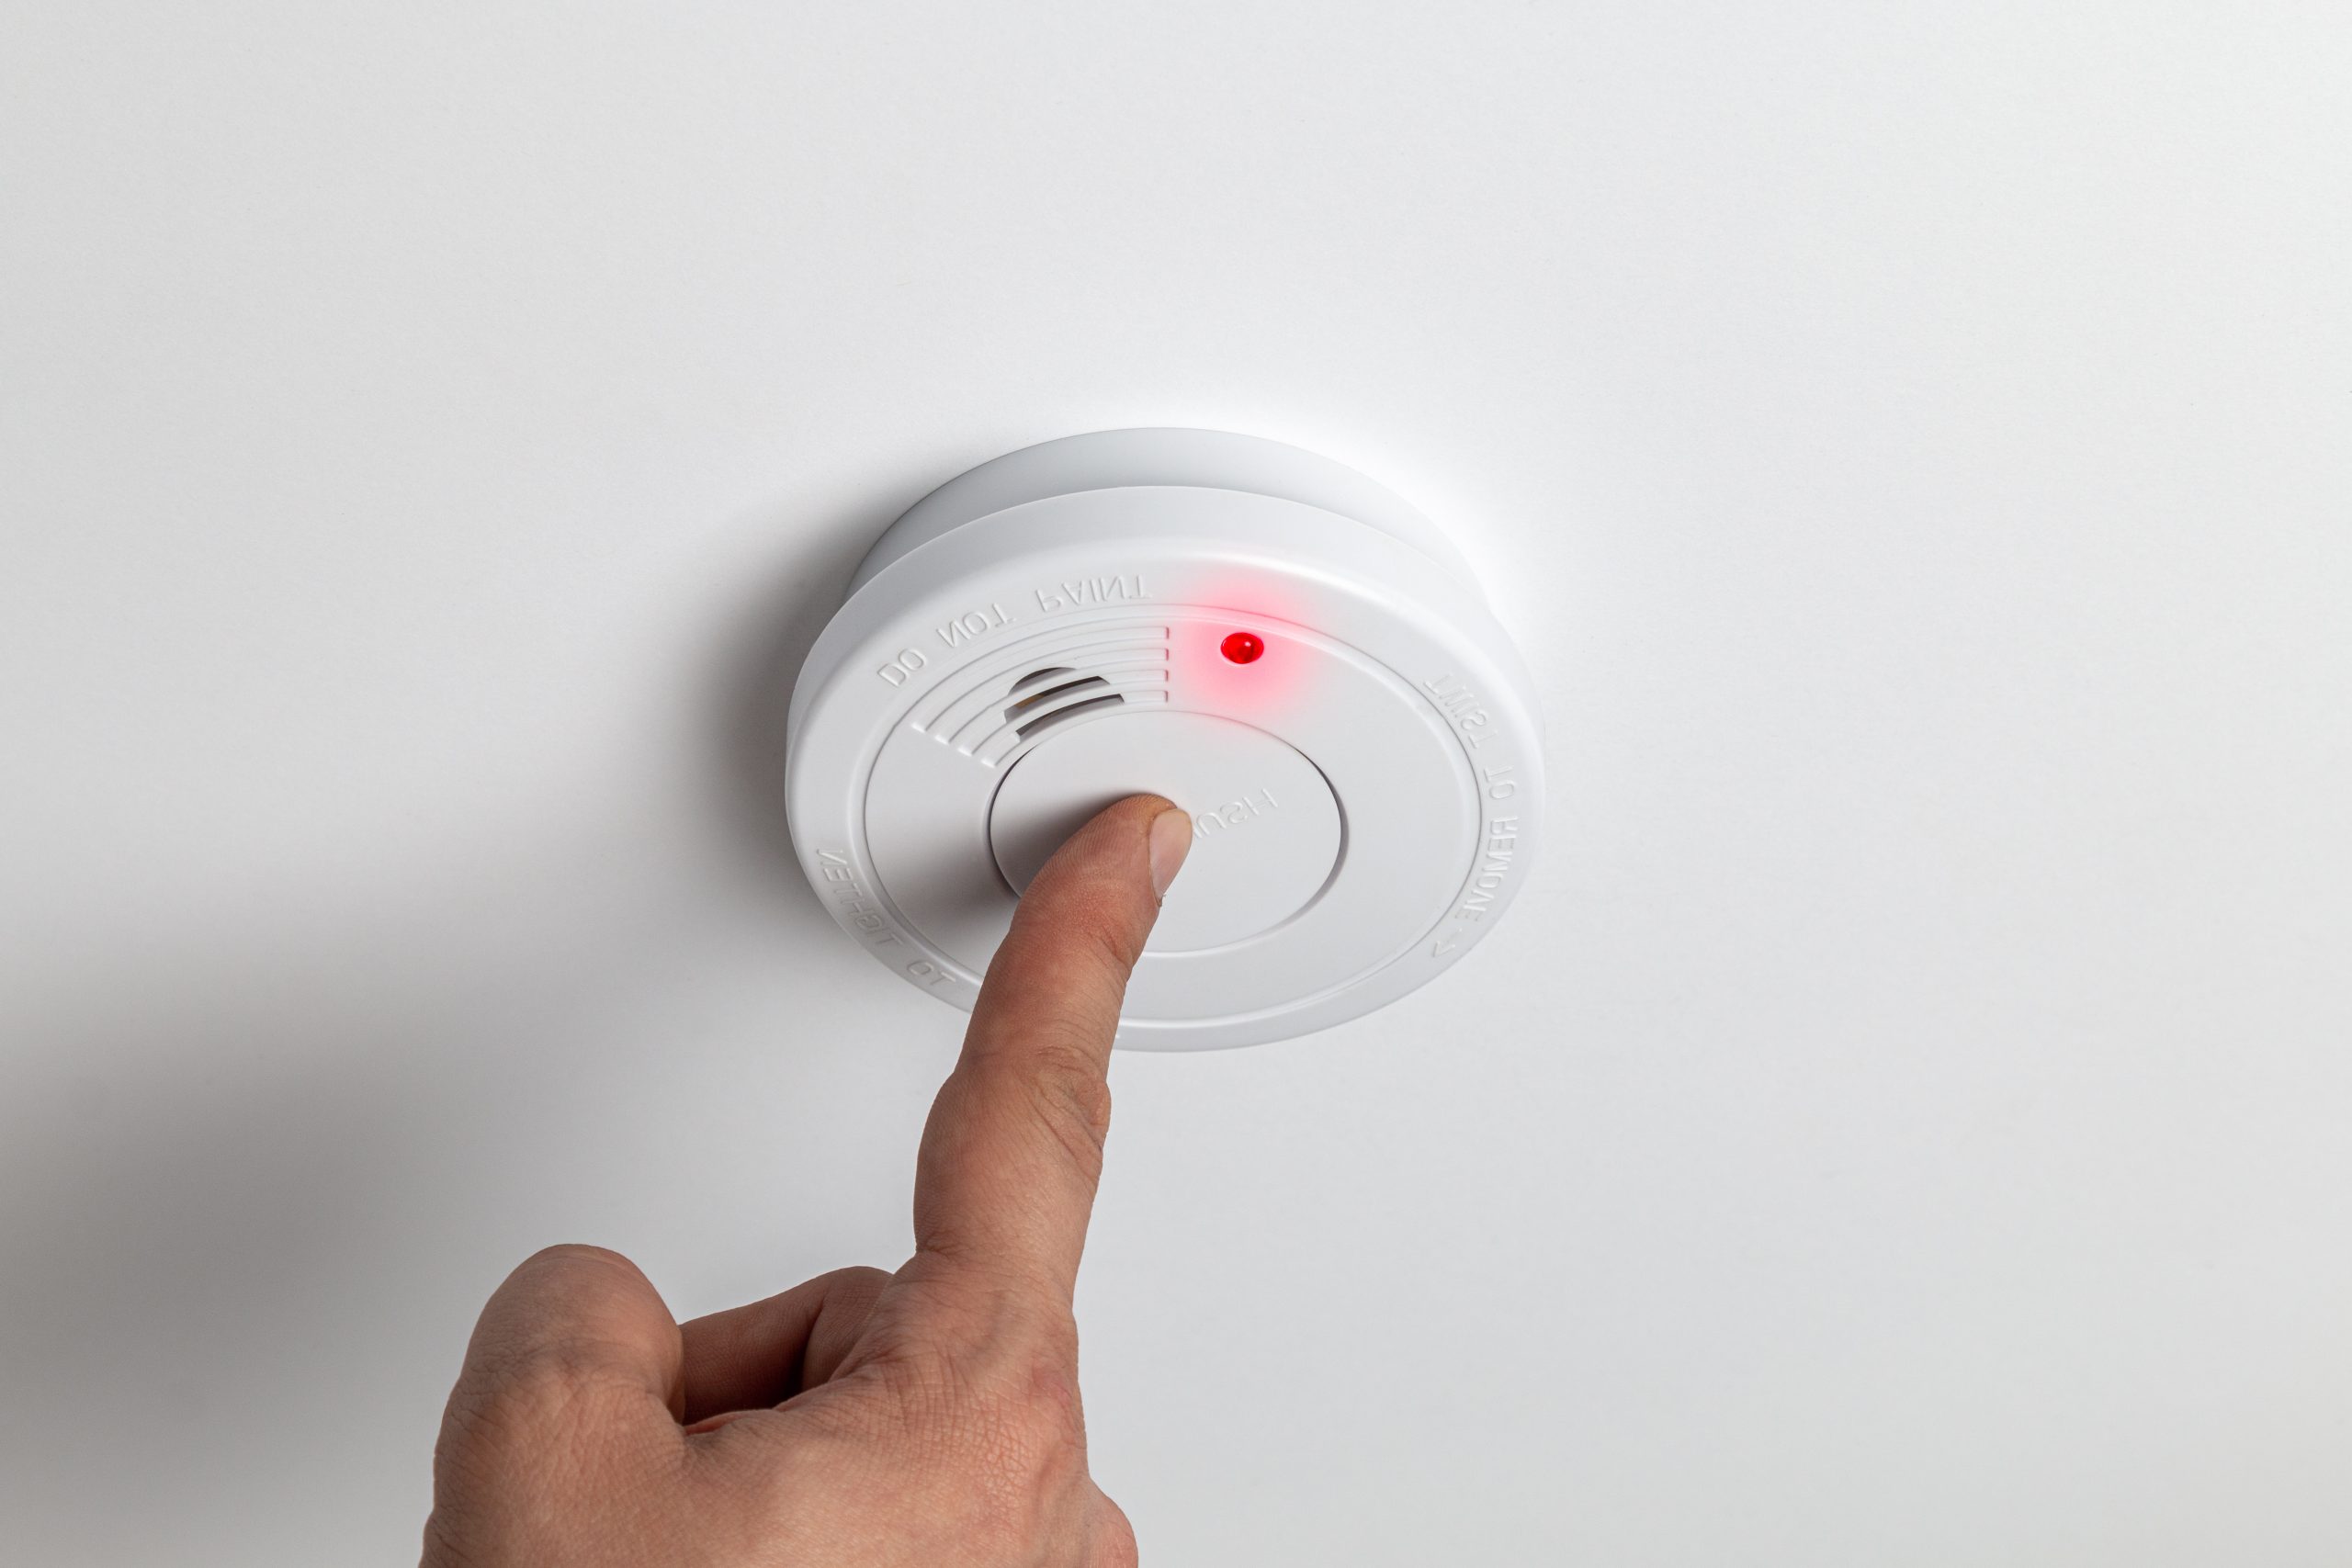 Can fire alarm monitoring systems provide notifications to building occupants?